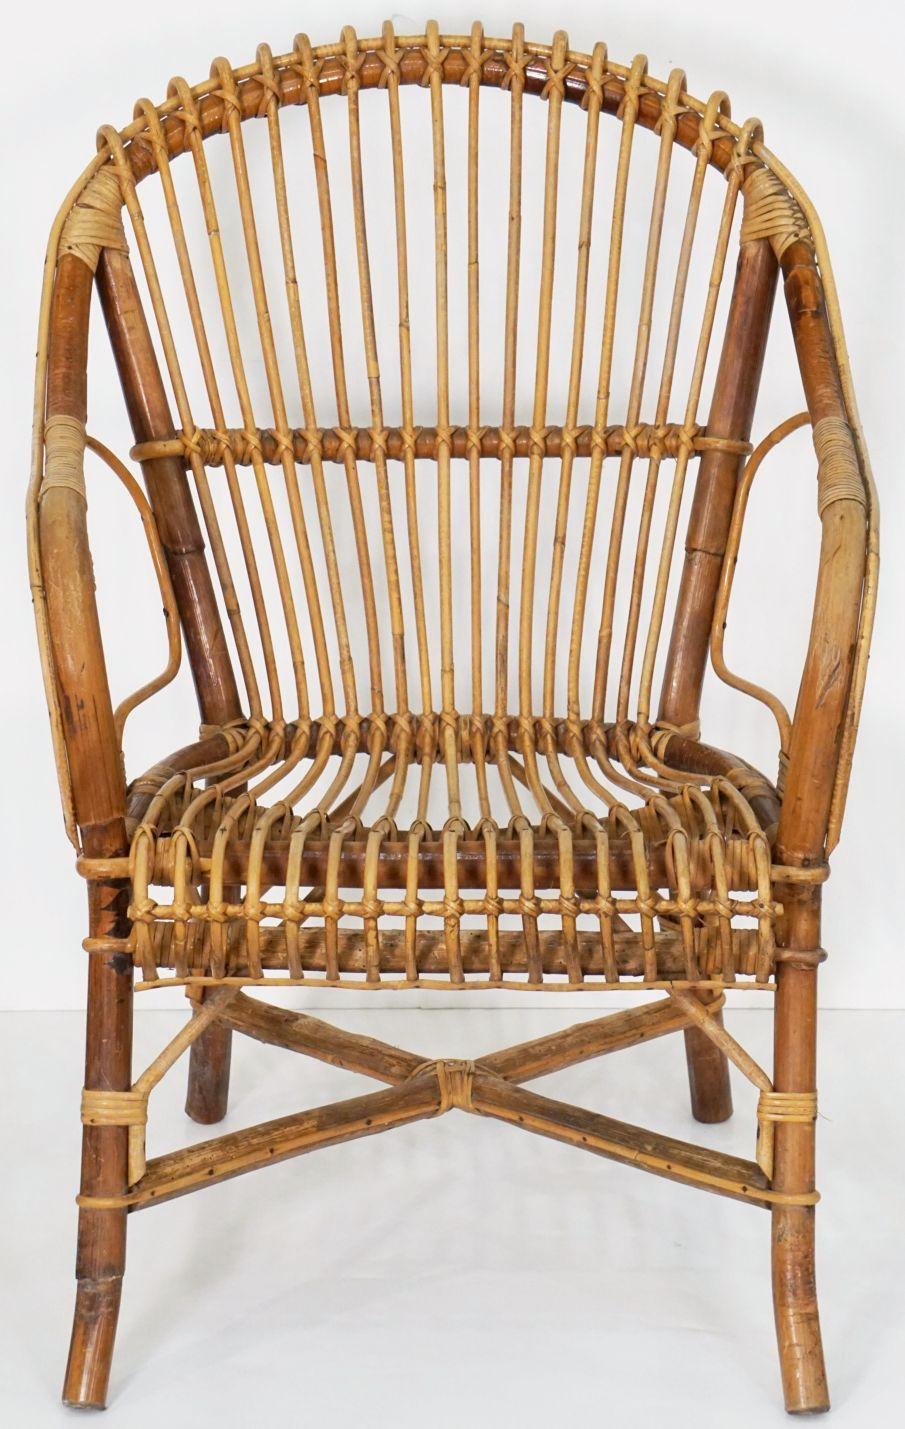 Mid-Century Modern Italian Fan-Backed Arm Chairs of Rattan and Bamboo from the Mid-20th Century For Sale